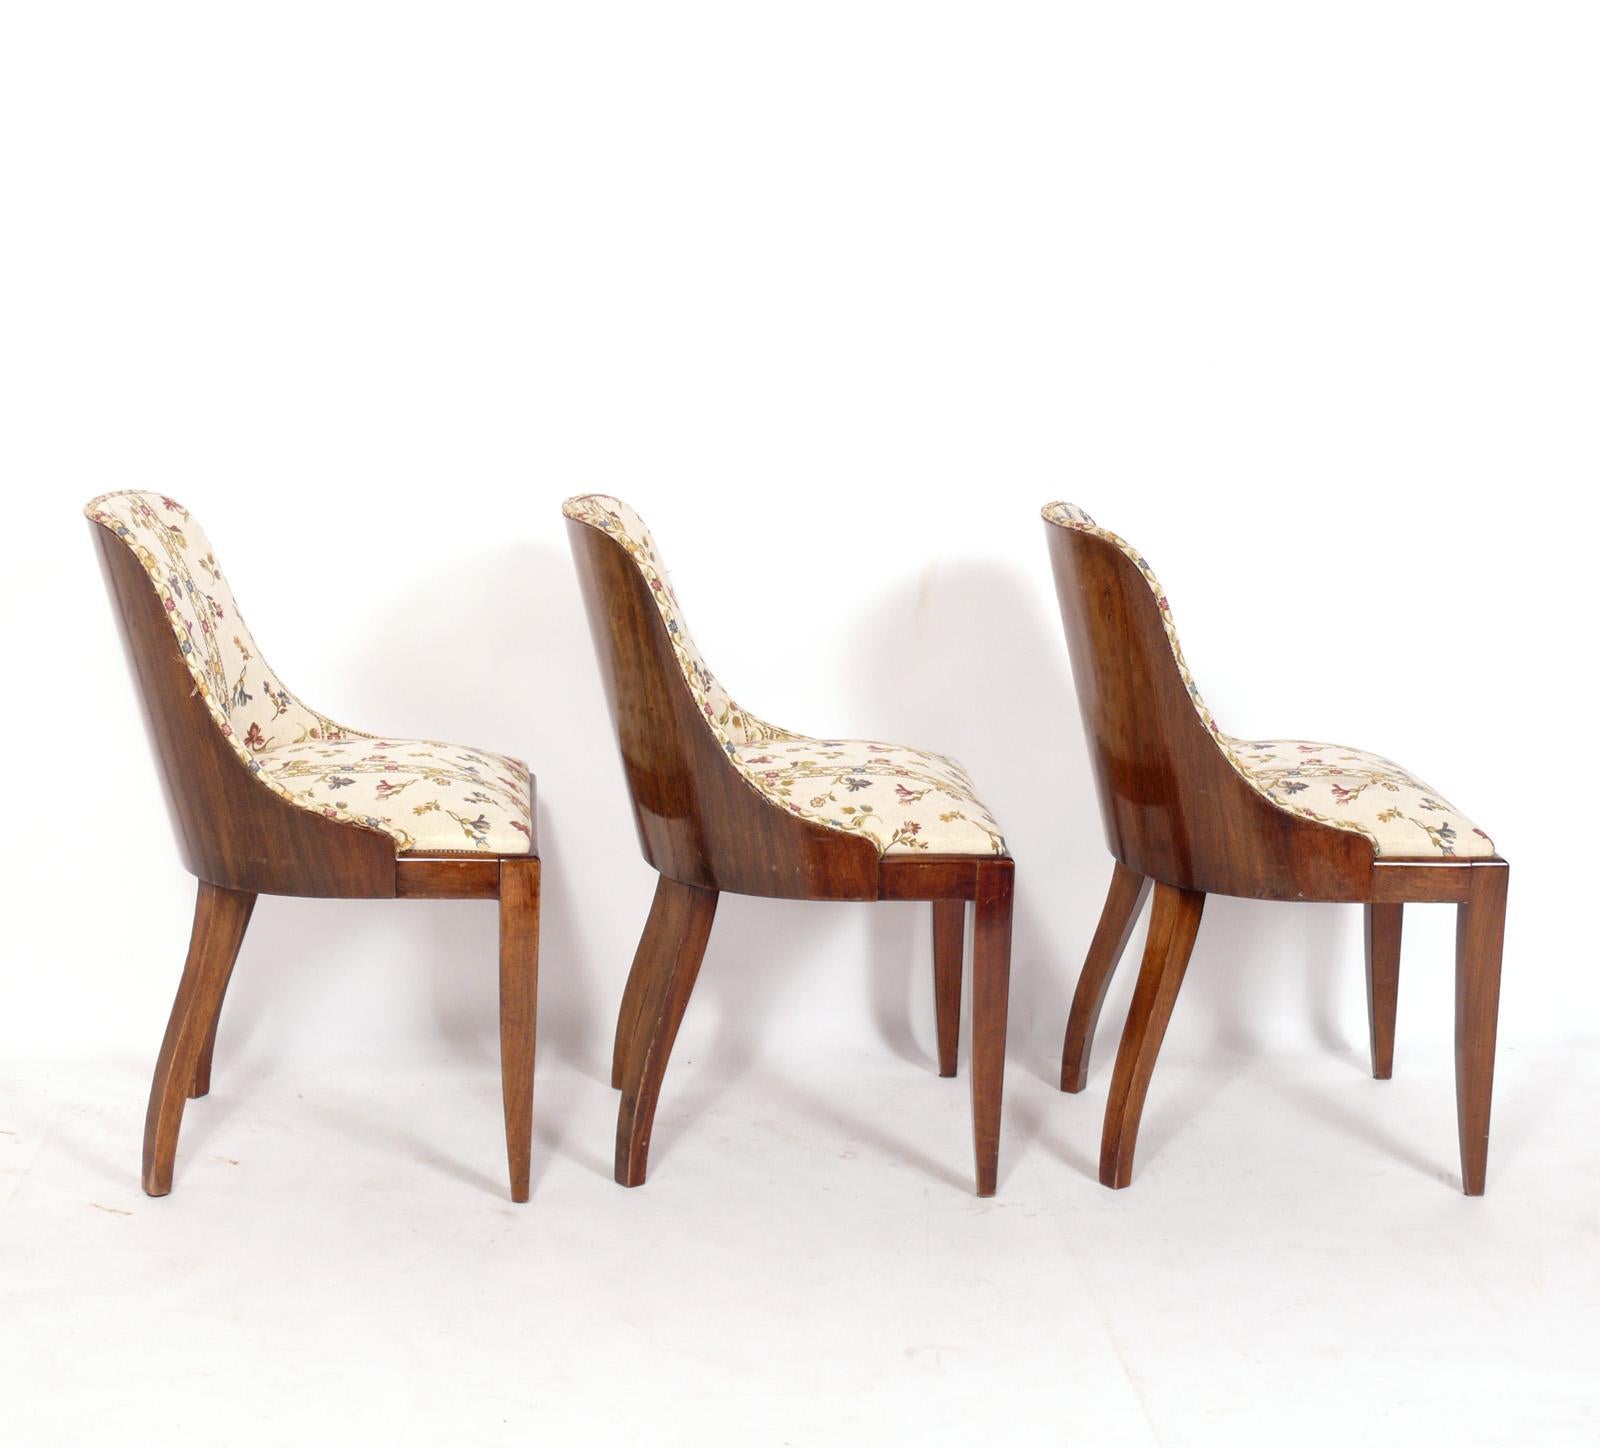 Set of six Curvaceous French Art Deco dining chairs, in the manner of Emile Jacques Ruhlmann, France, circa 1930s. These chairs are currently being refinished and reupholstered and can be completed in your choice of wood finish color and